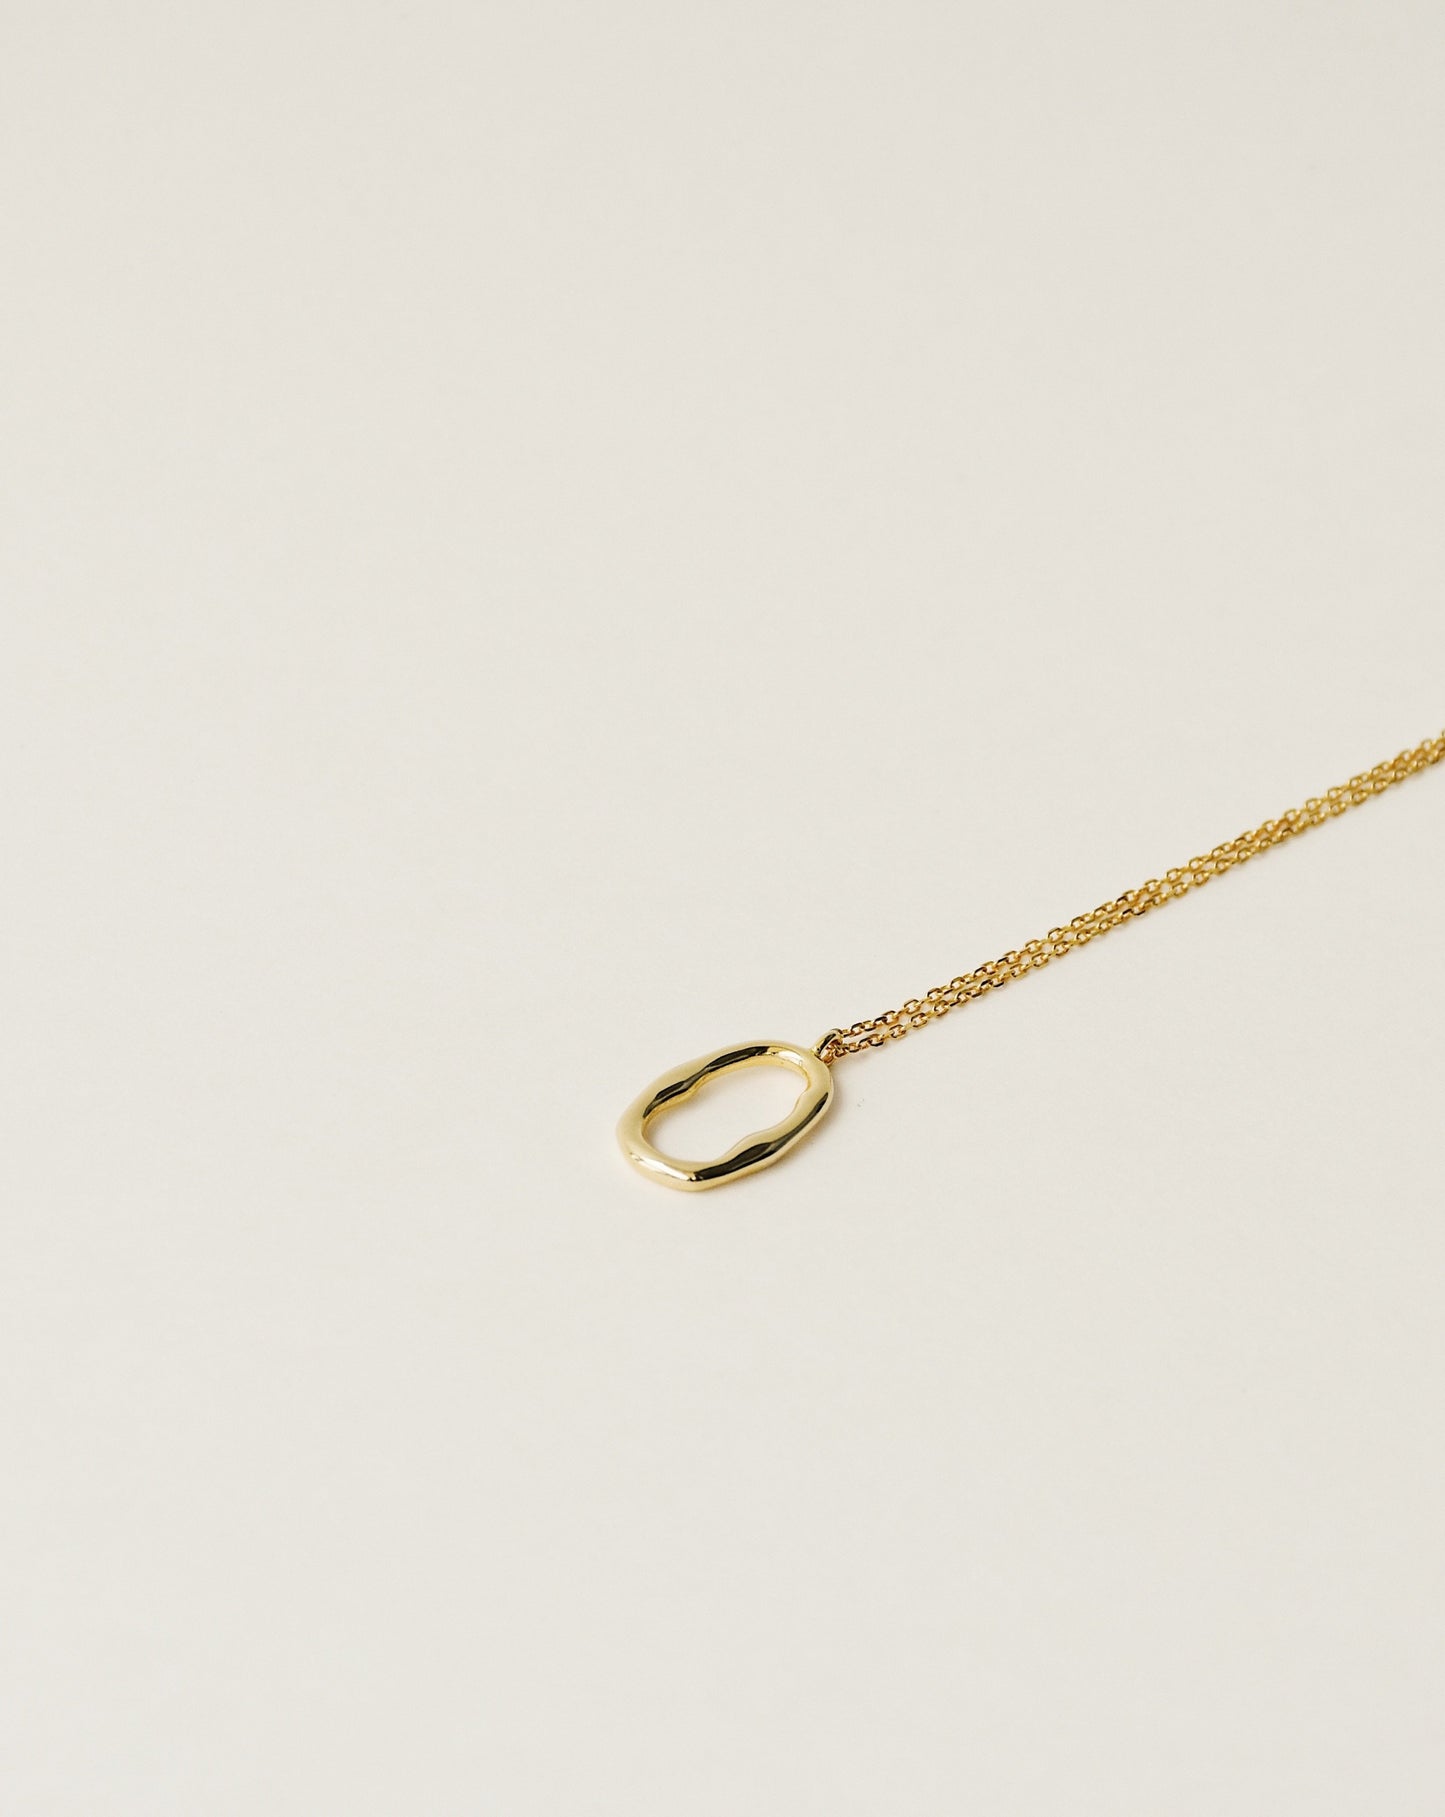 irregularly shaped minimalist pendant necklace handcrafted from 925 sterling silver plated in 18k gold. 2020 slow fashion trend.